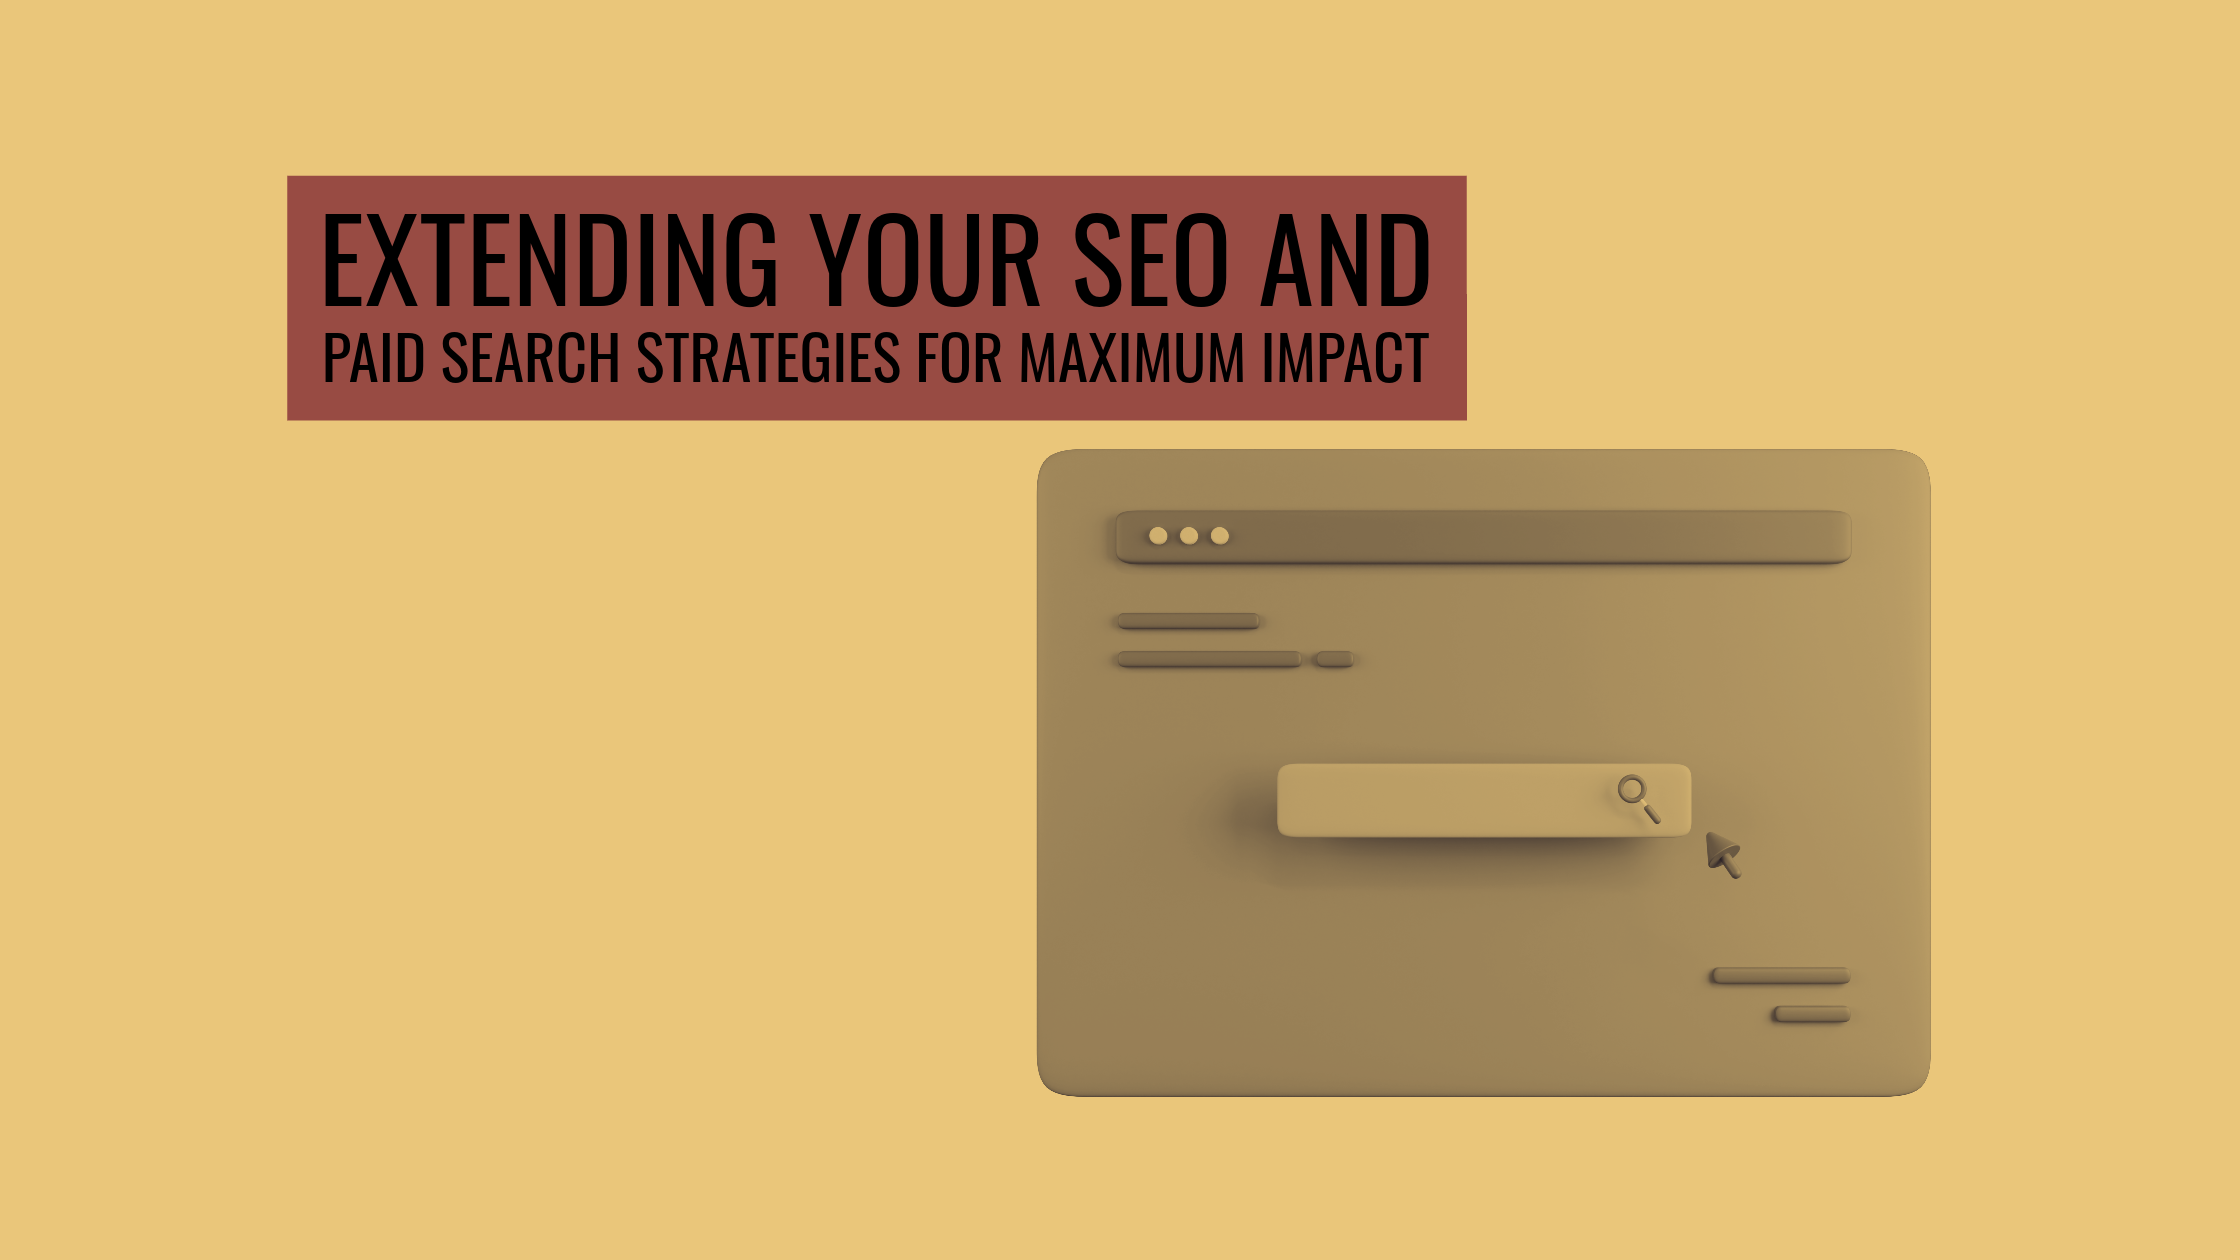 Extending Your SEO and Paid Search Strategies for Maximum Impact